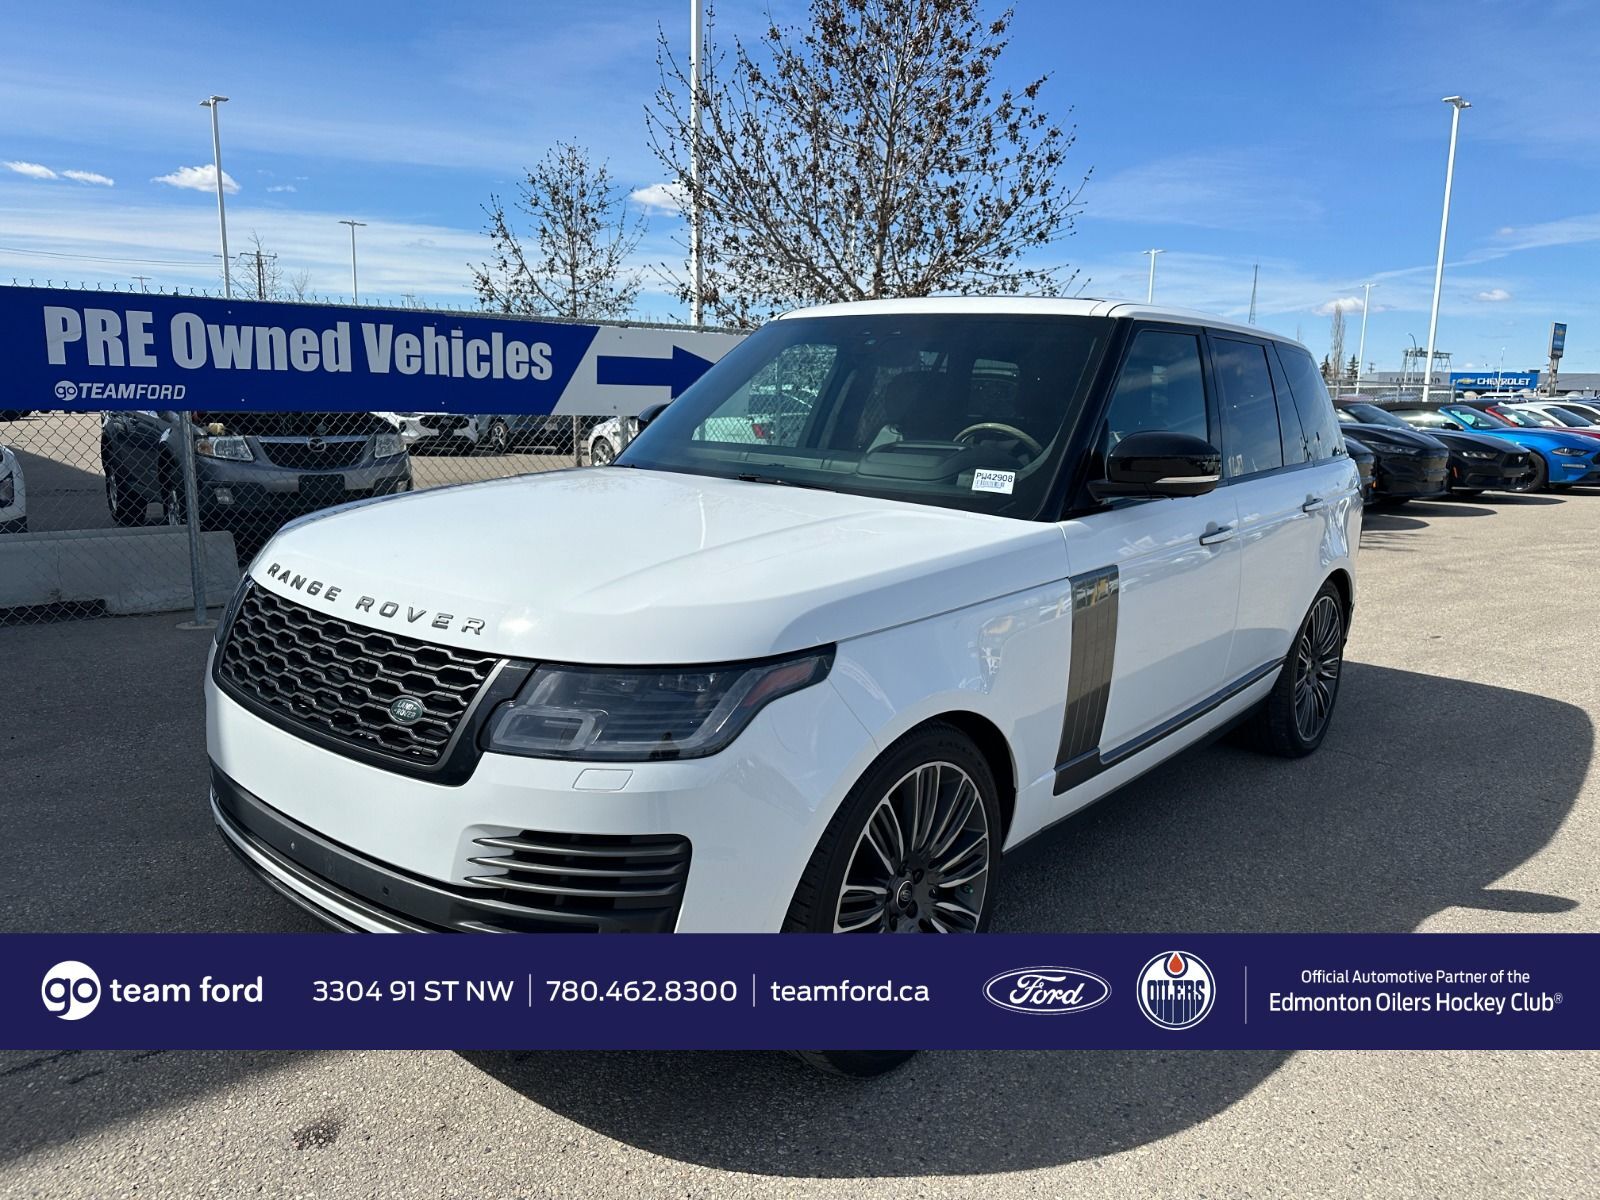 2019 Land Rover Range Rover AUTOBIOGRAPHY, 5.0L V8 ENG, HEATED STEERING WHEEL,